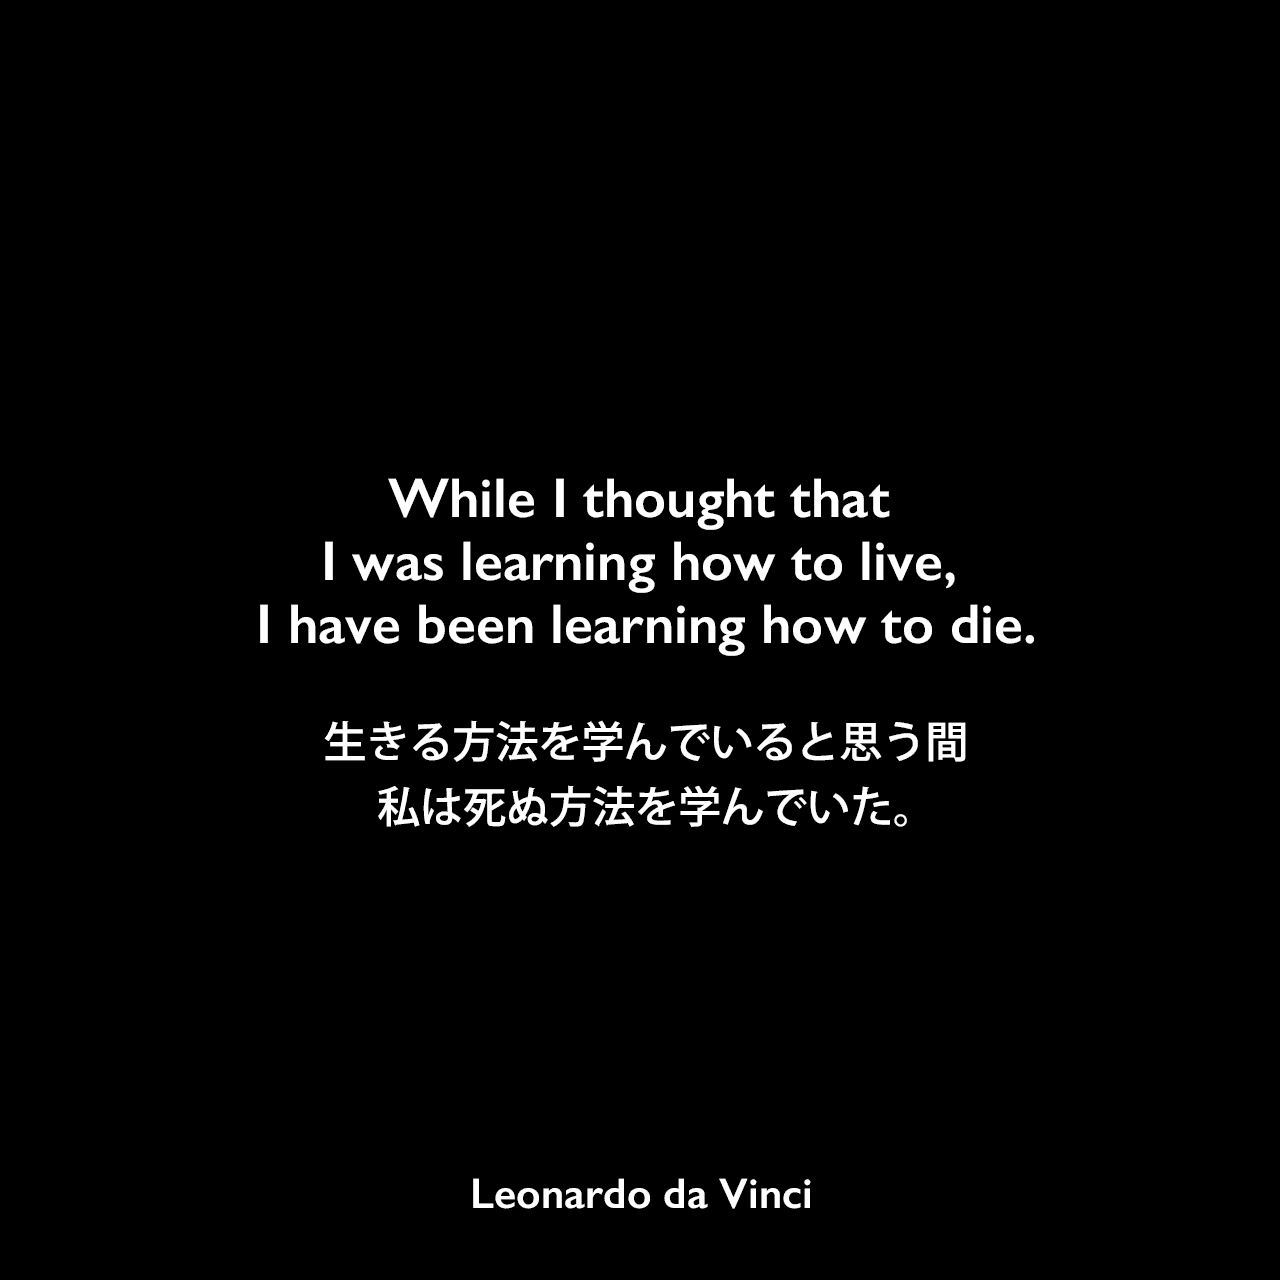 While I thought that I was learning how to live, I have been learning how to die.生きる方法を学んでいると思う間、私は死ぬ方法を学んでいた。- レオナルド・ダ・ヴィンチのノートよりLeonardo da Vinci